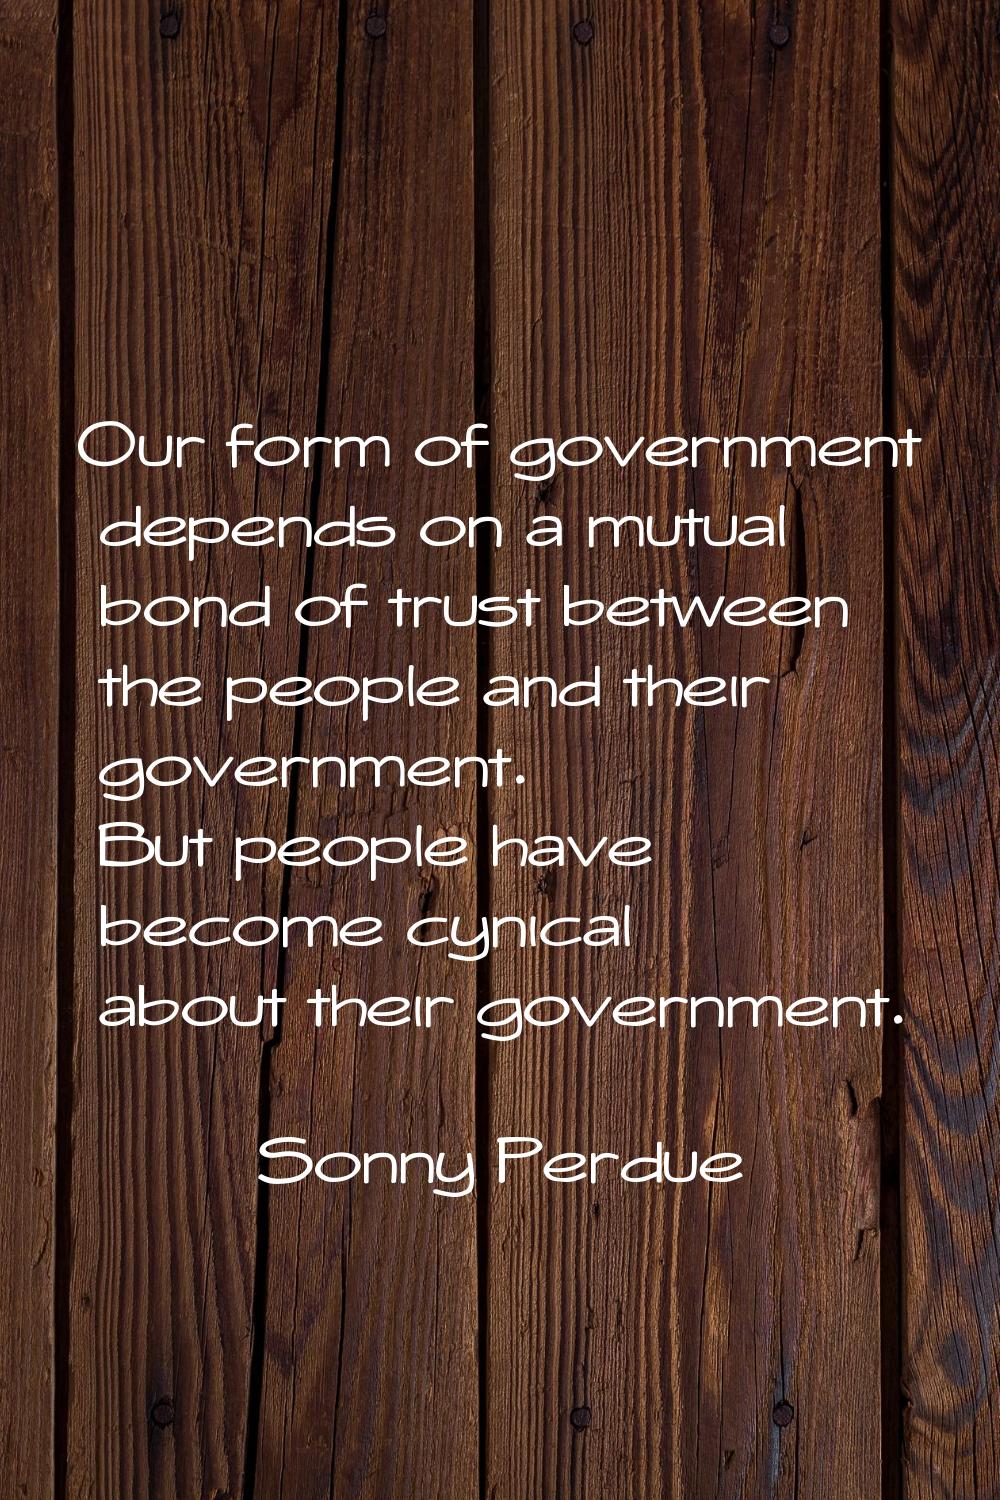 Our form of government depends on a mutual bond of trust between the people and their government. B